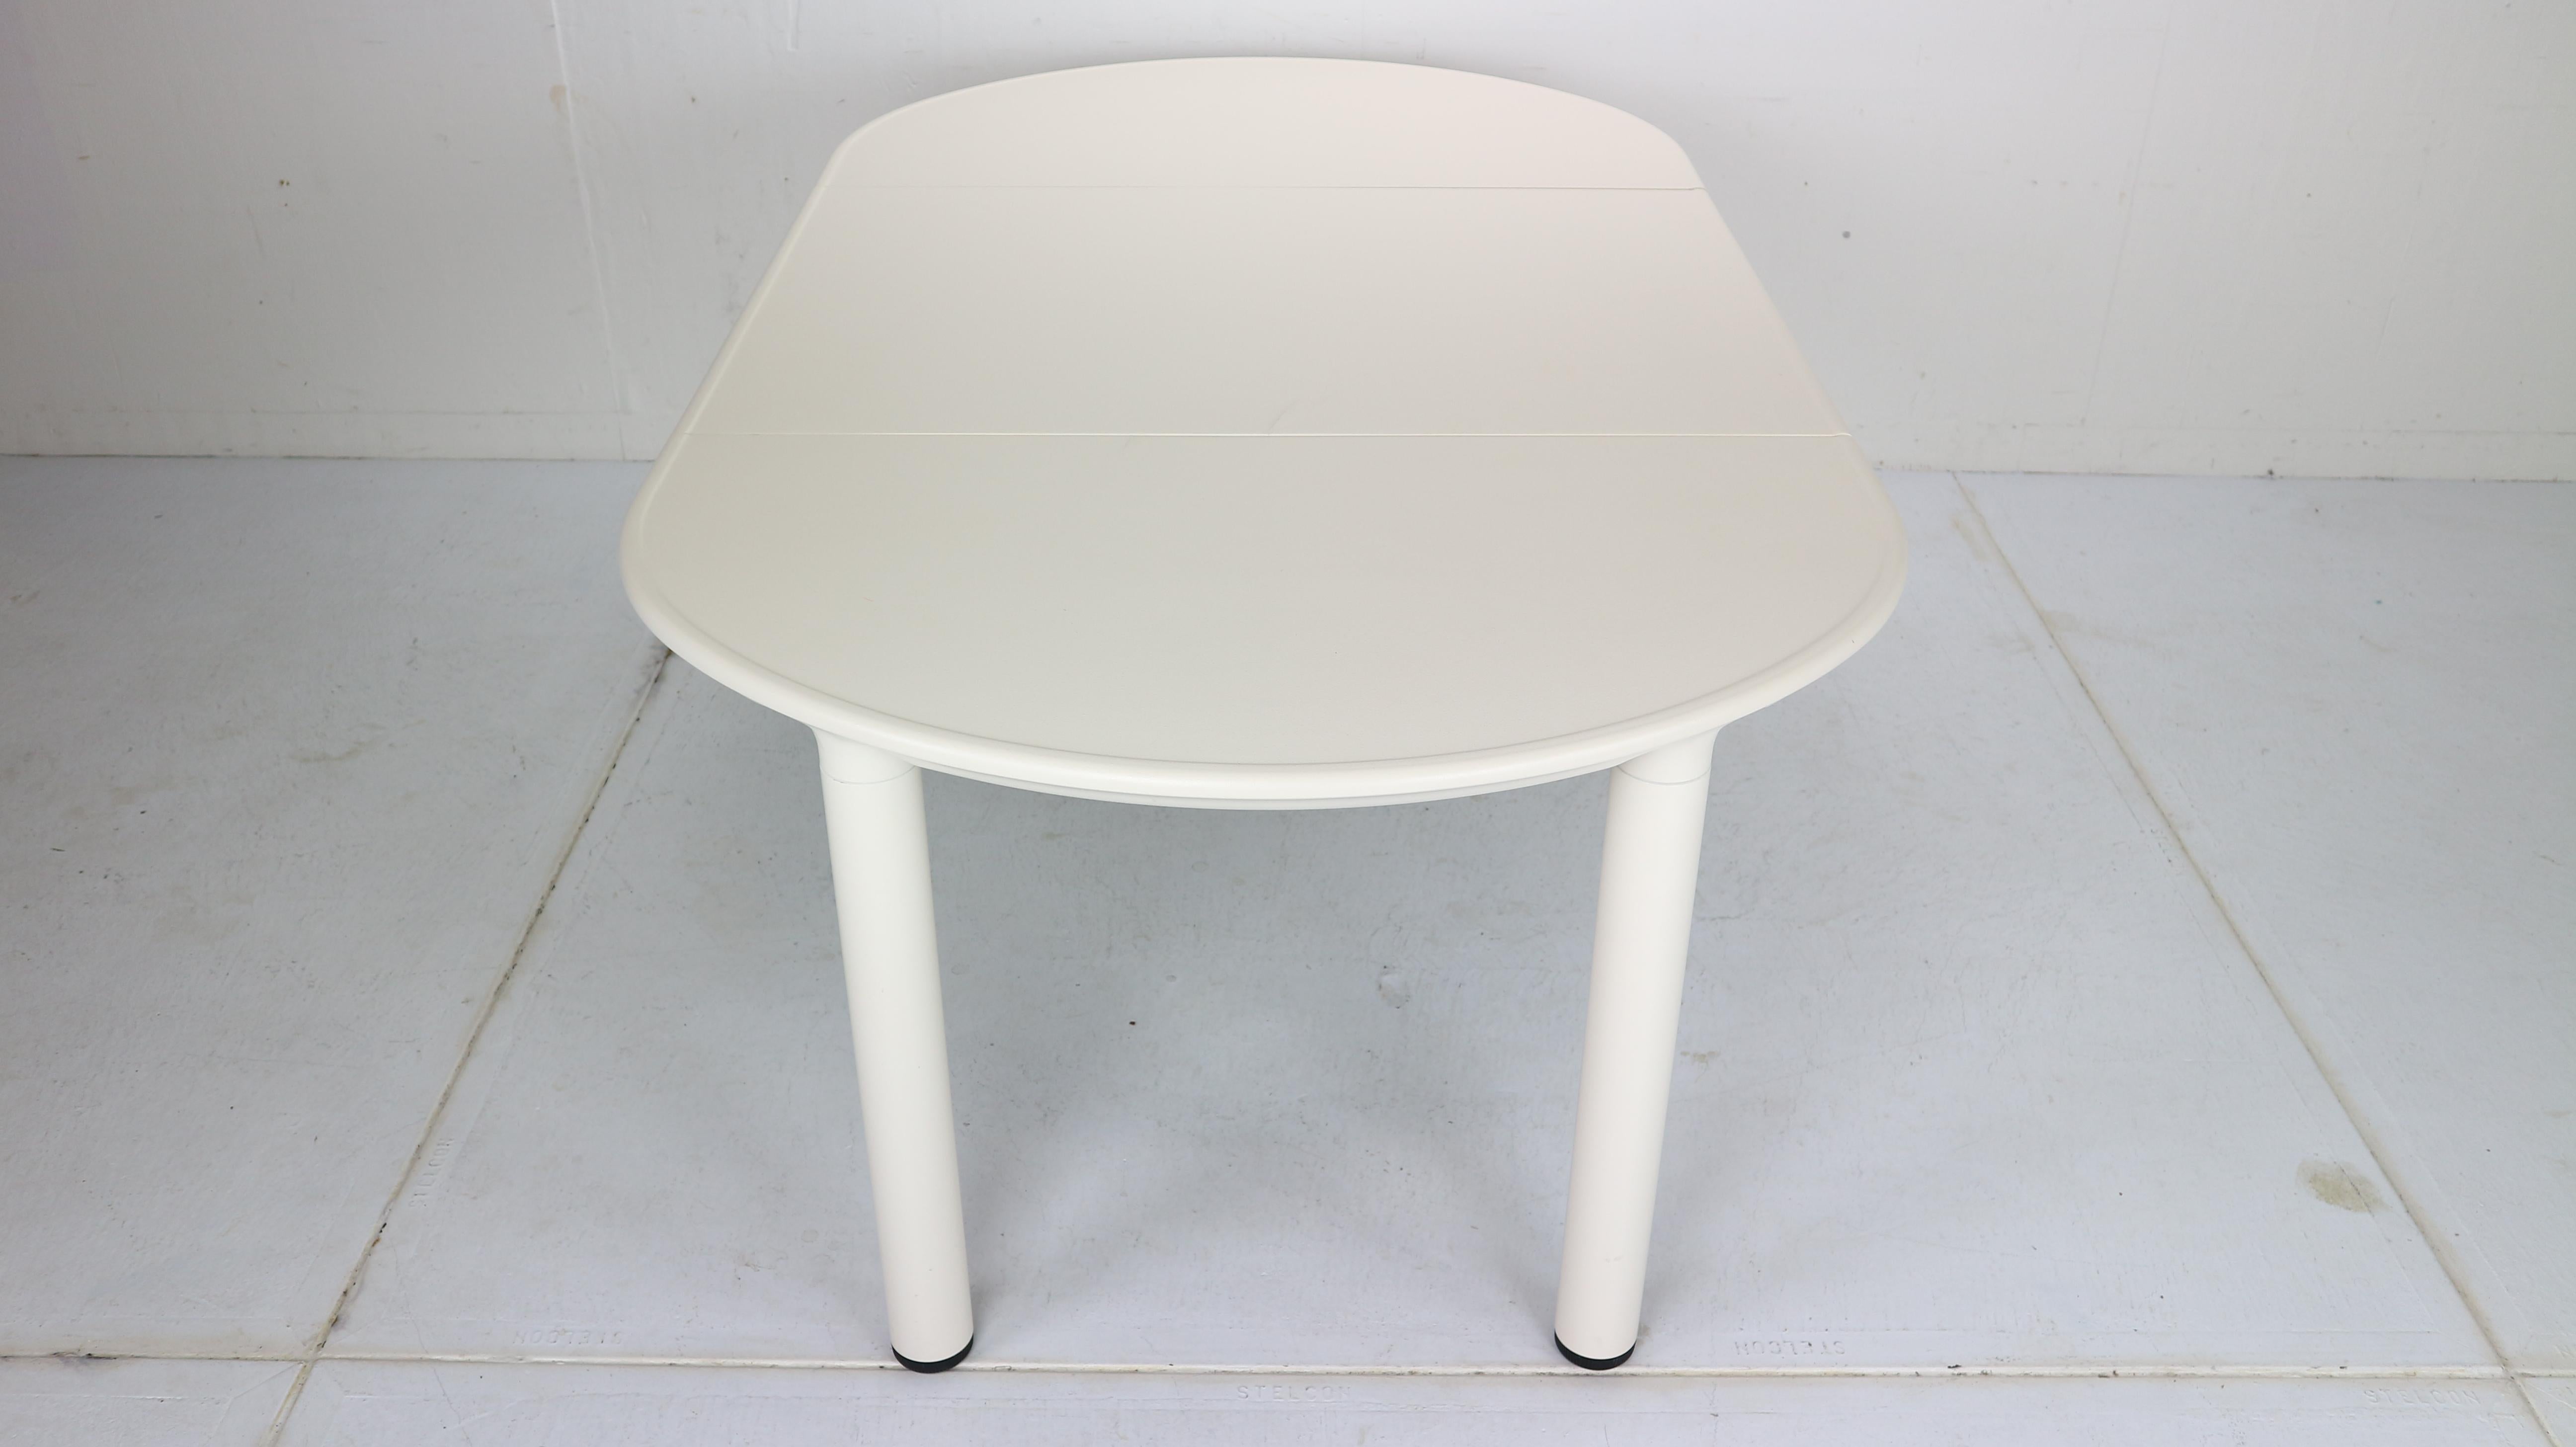 Metal Round/ Oval Extendable Dinning Table #720 by Dieter Rams for Vitsoe, 1972